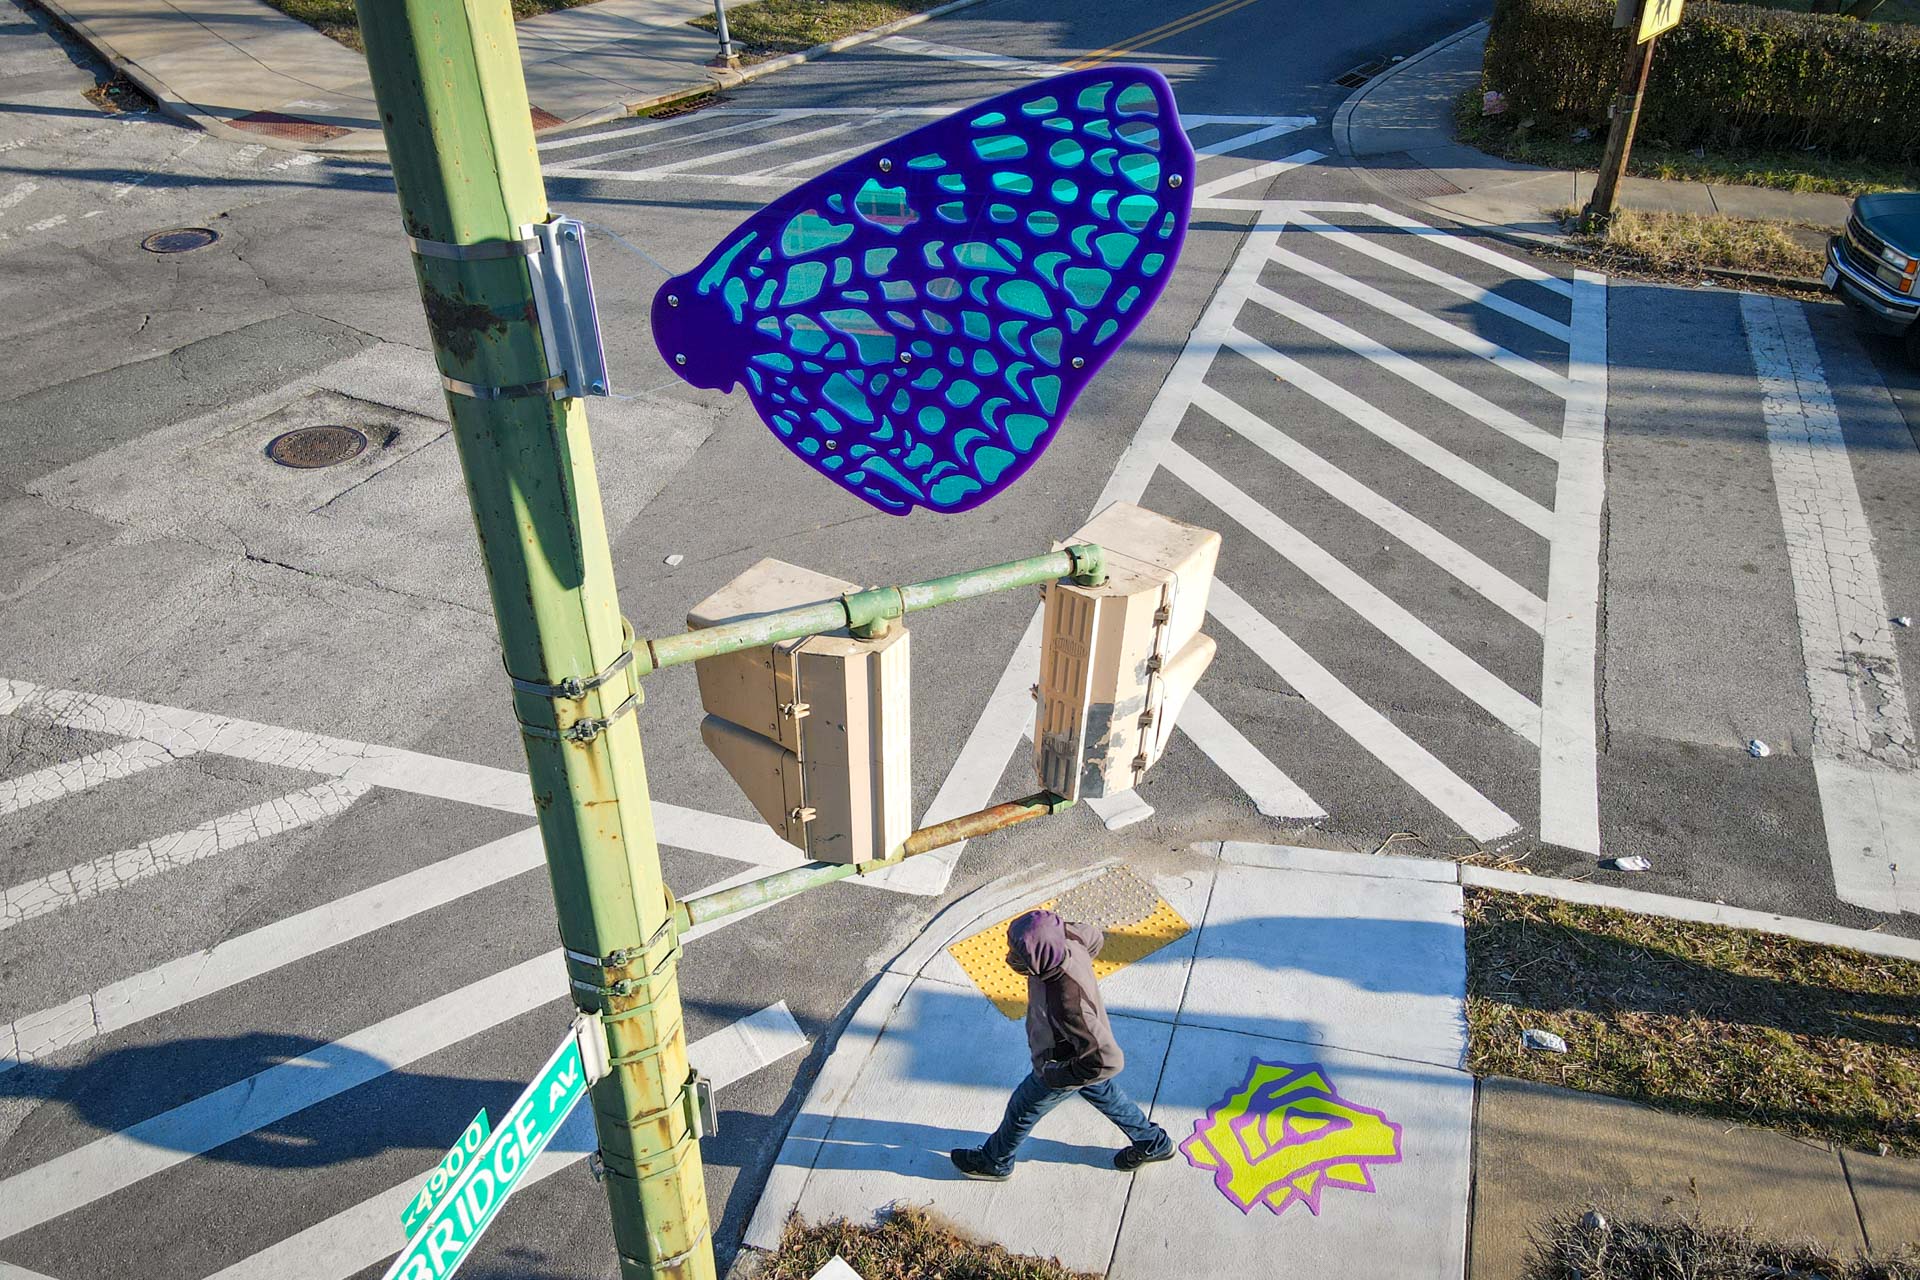 Pimlico Wayfinding butterfly sign and thermoplastic flower marker at Oakley and Pimlico with pedestrian